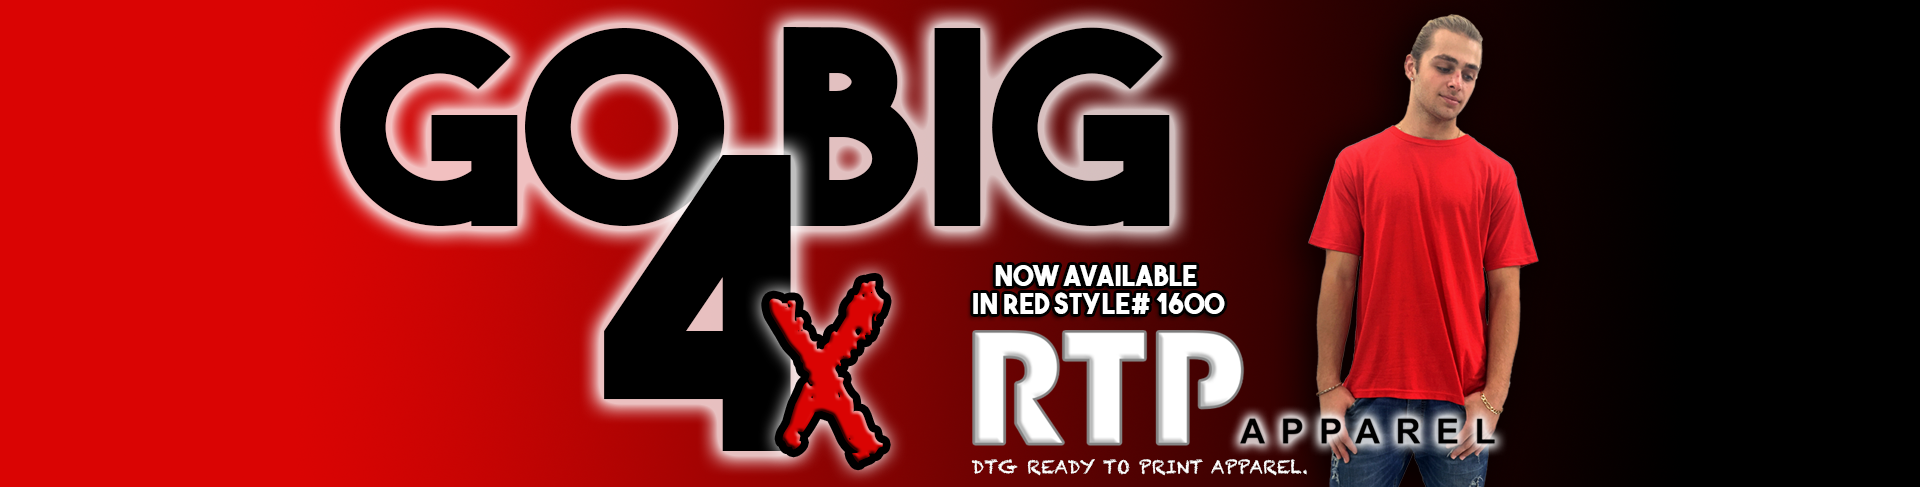 RTP Apparel in RED Go BIG 4X Available